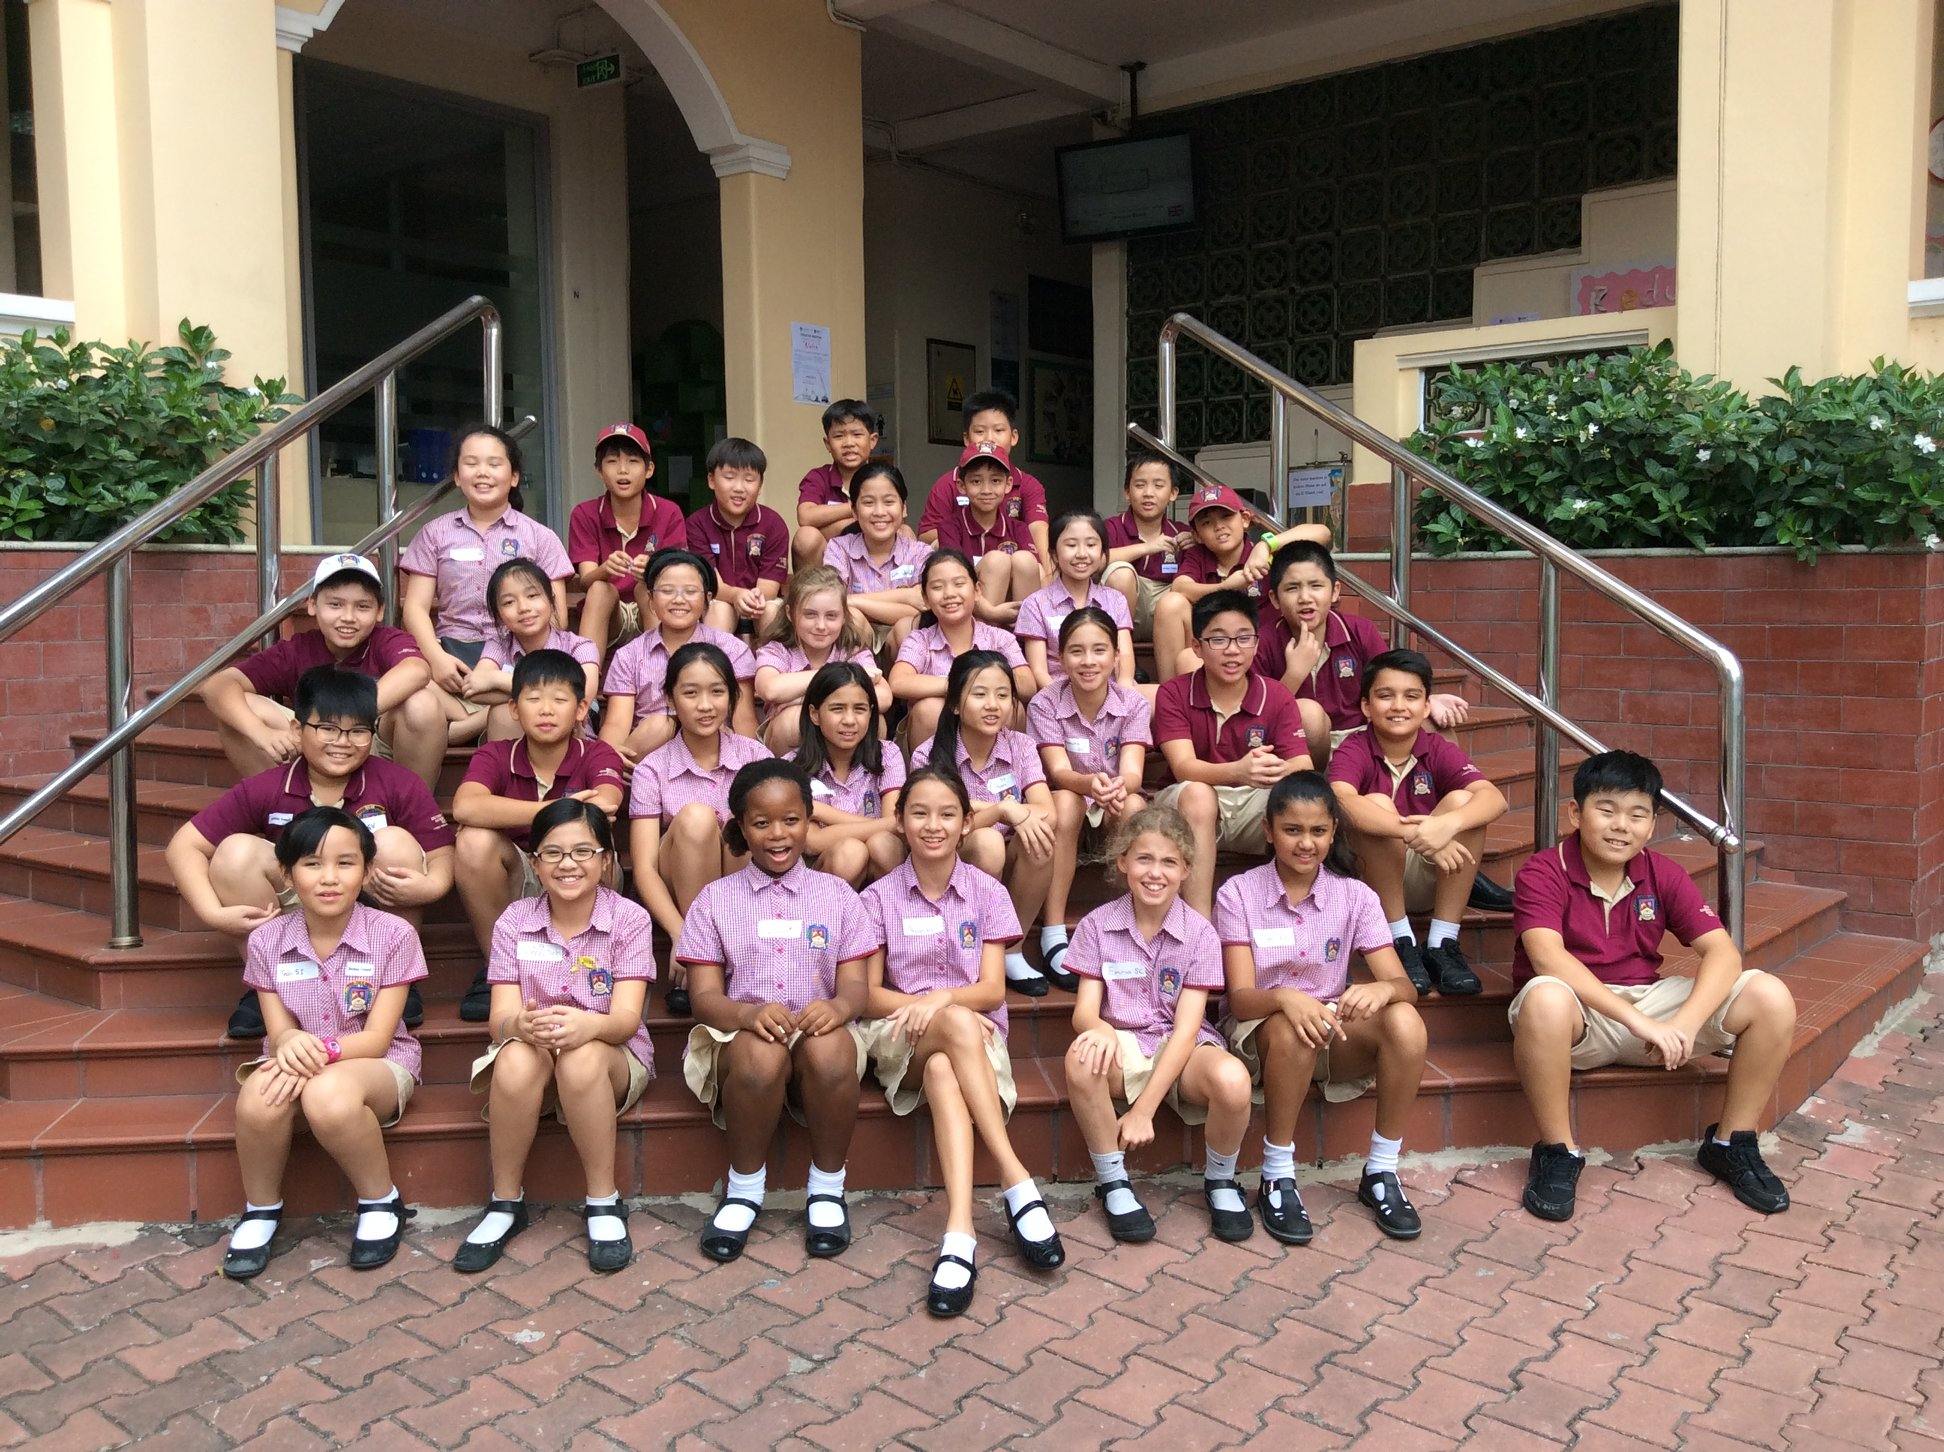 BVIS & BIS Cross-Campus Student Council - bvis-and-bis-cross-campus-student-council